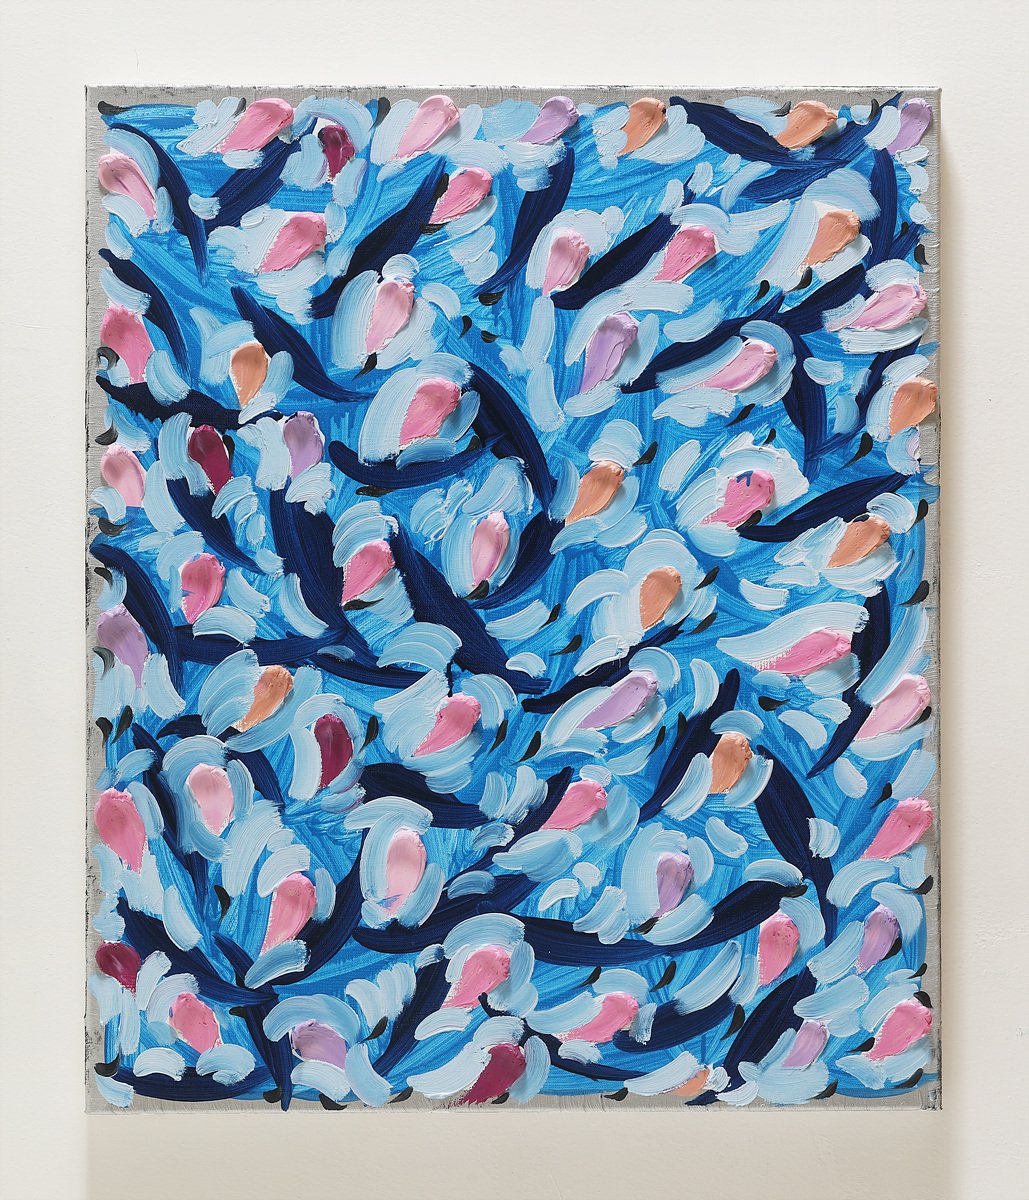 The Painter's Garden (Pink and Blue)